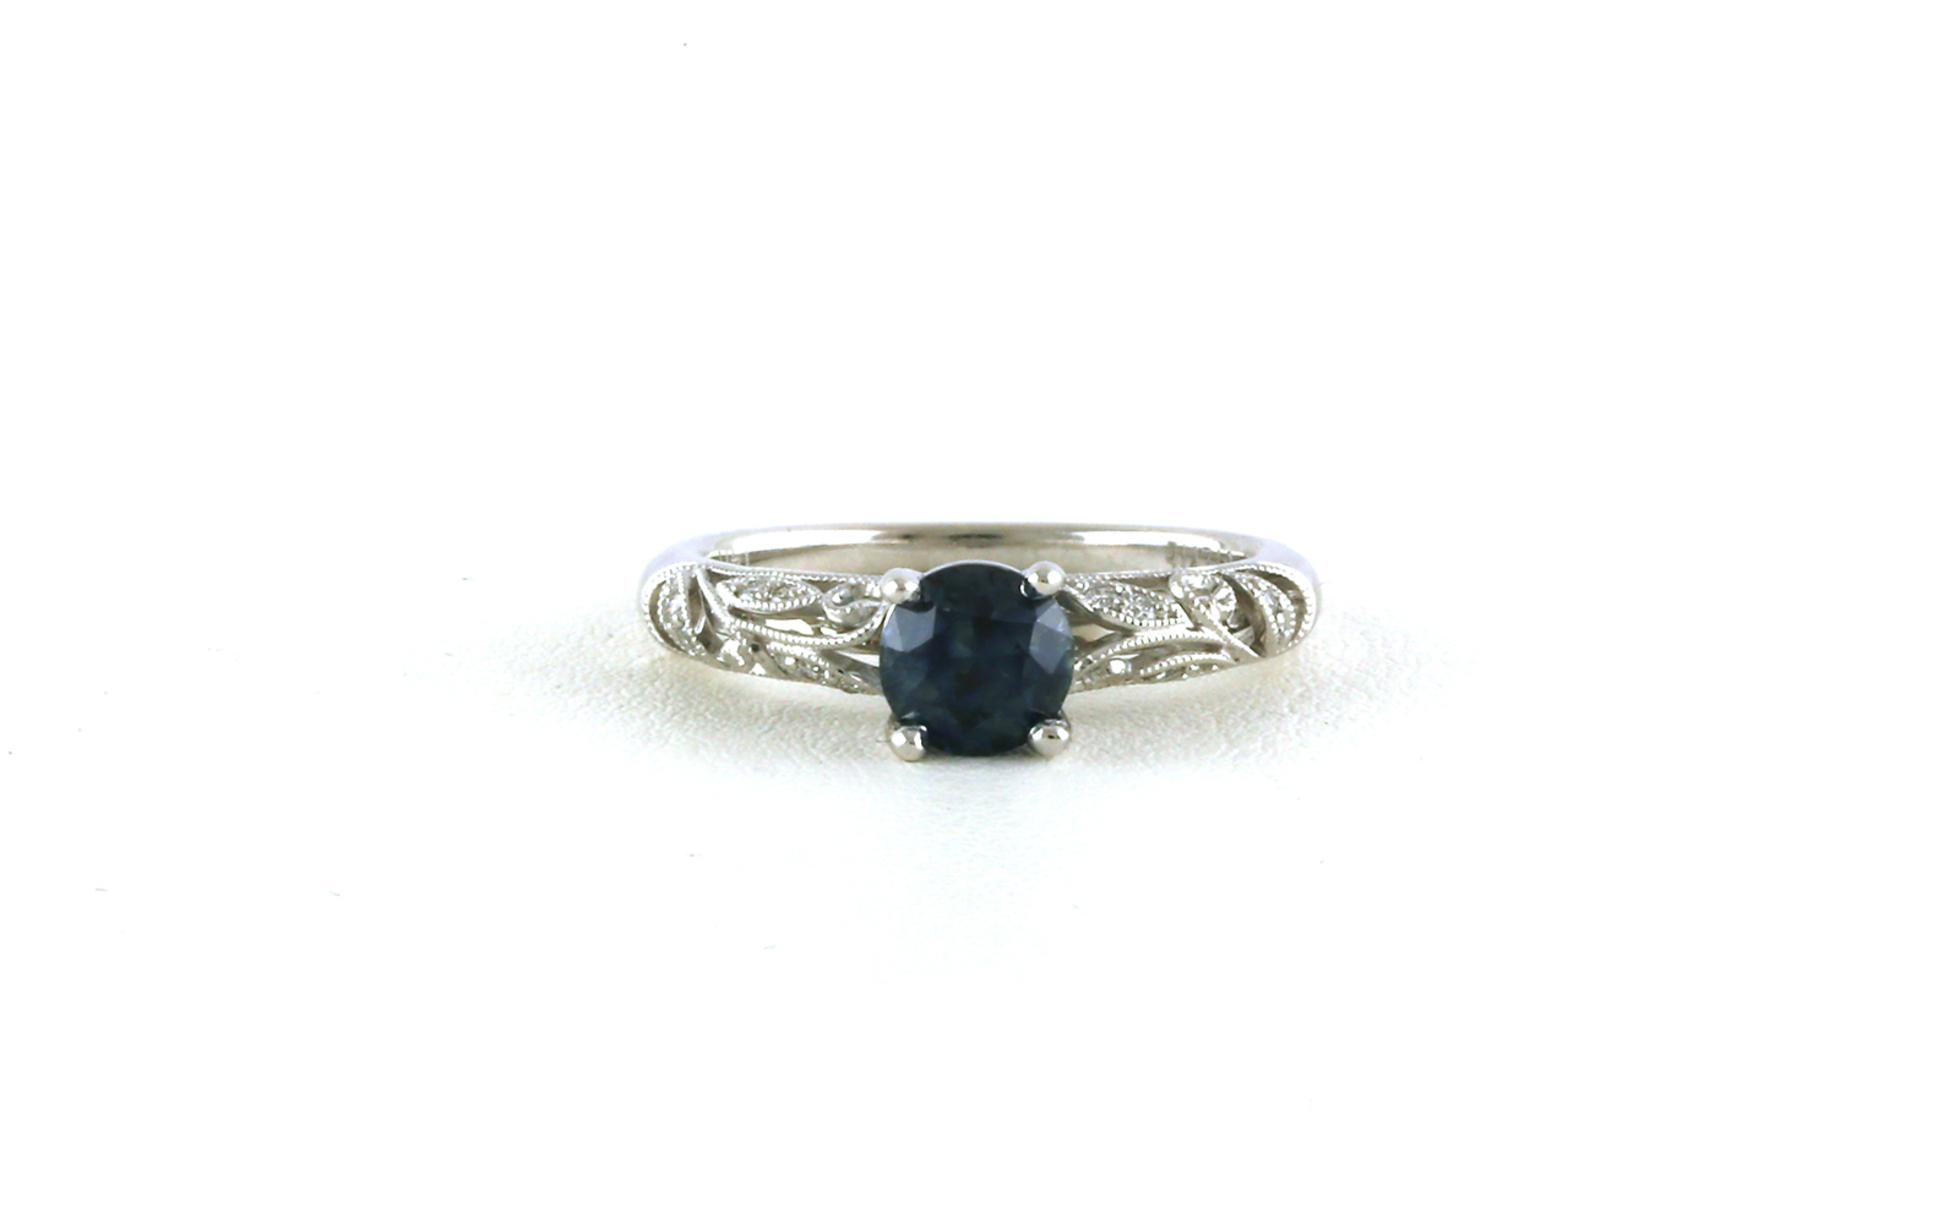 Filigree Prong-set Montana Sapphire Ring with Milgrain Details in White Gold (1.11cts TWT)